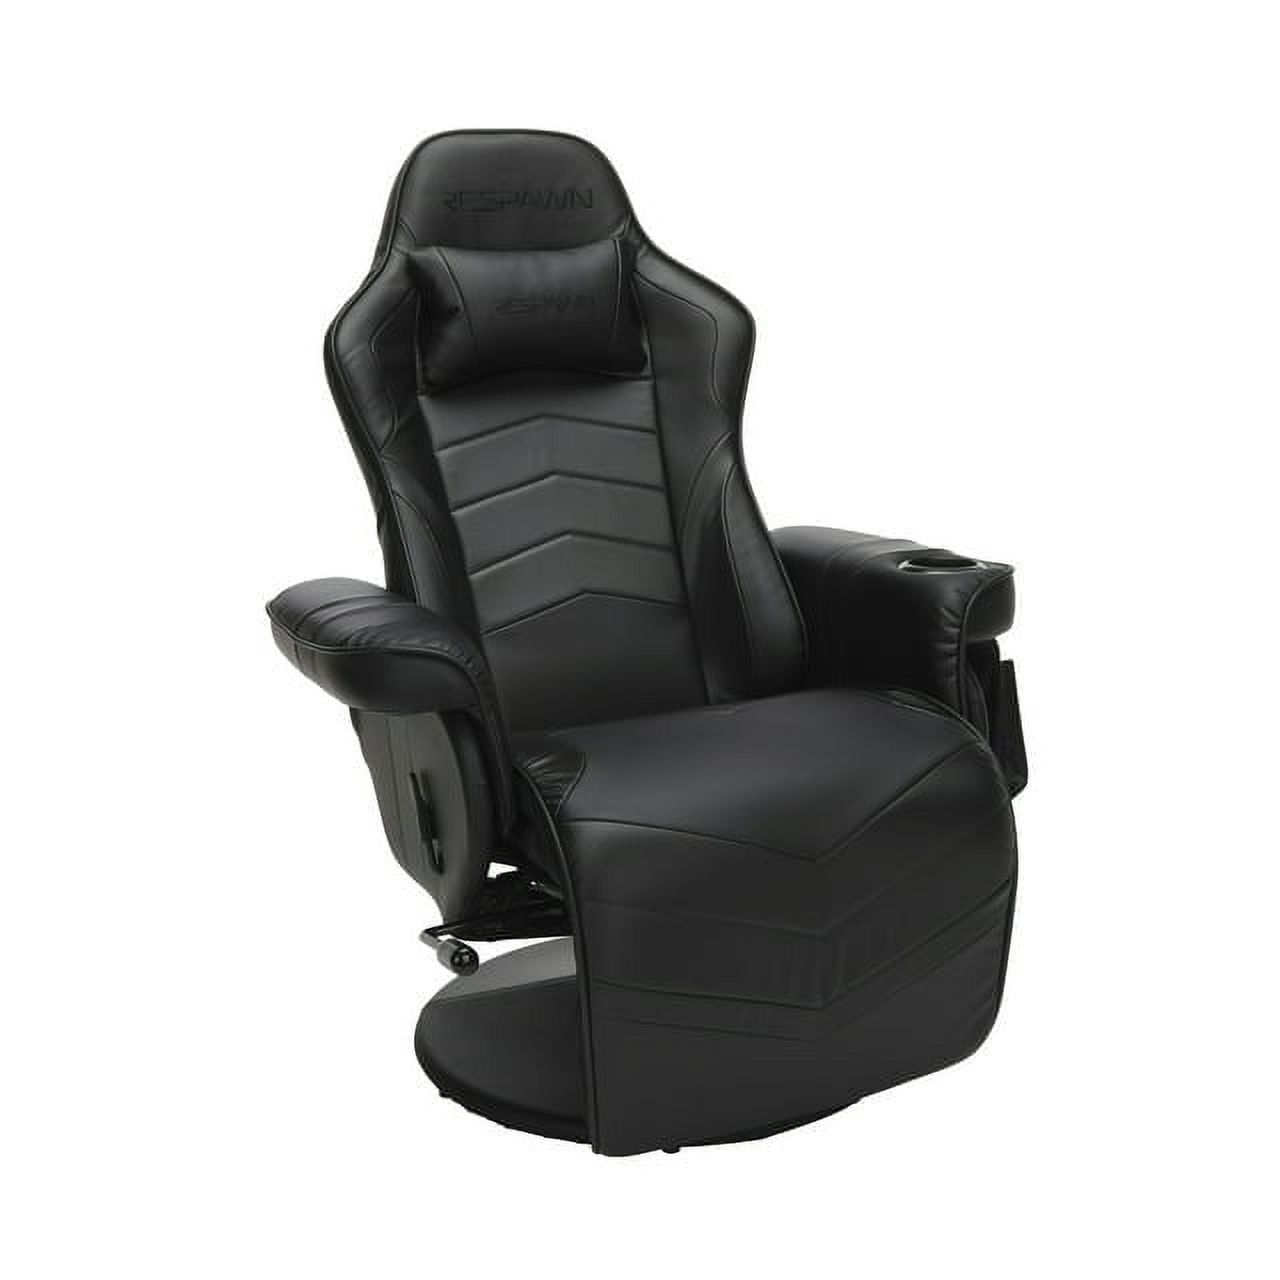 RESPAWN 900 Gaming Recliner - Video Games Console Recliner Chair, Computer Recliner, Adjustable Leg Rest and Recline, Recliner with Cupholder, Reclining Gaming Chair with Footrest - Black - image 1 of 10